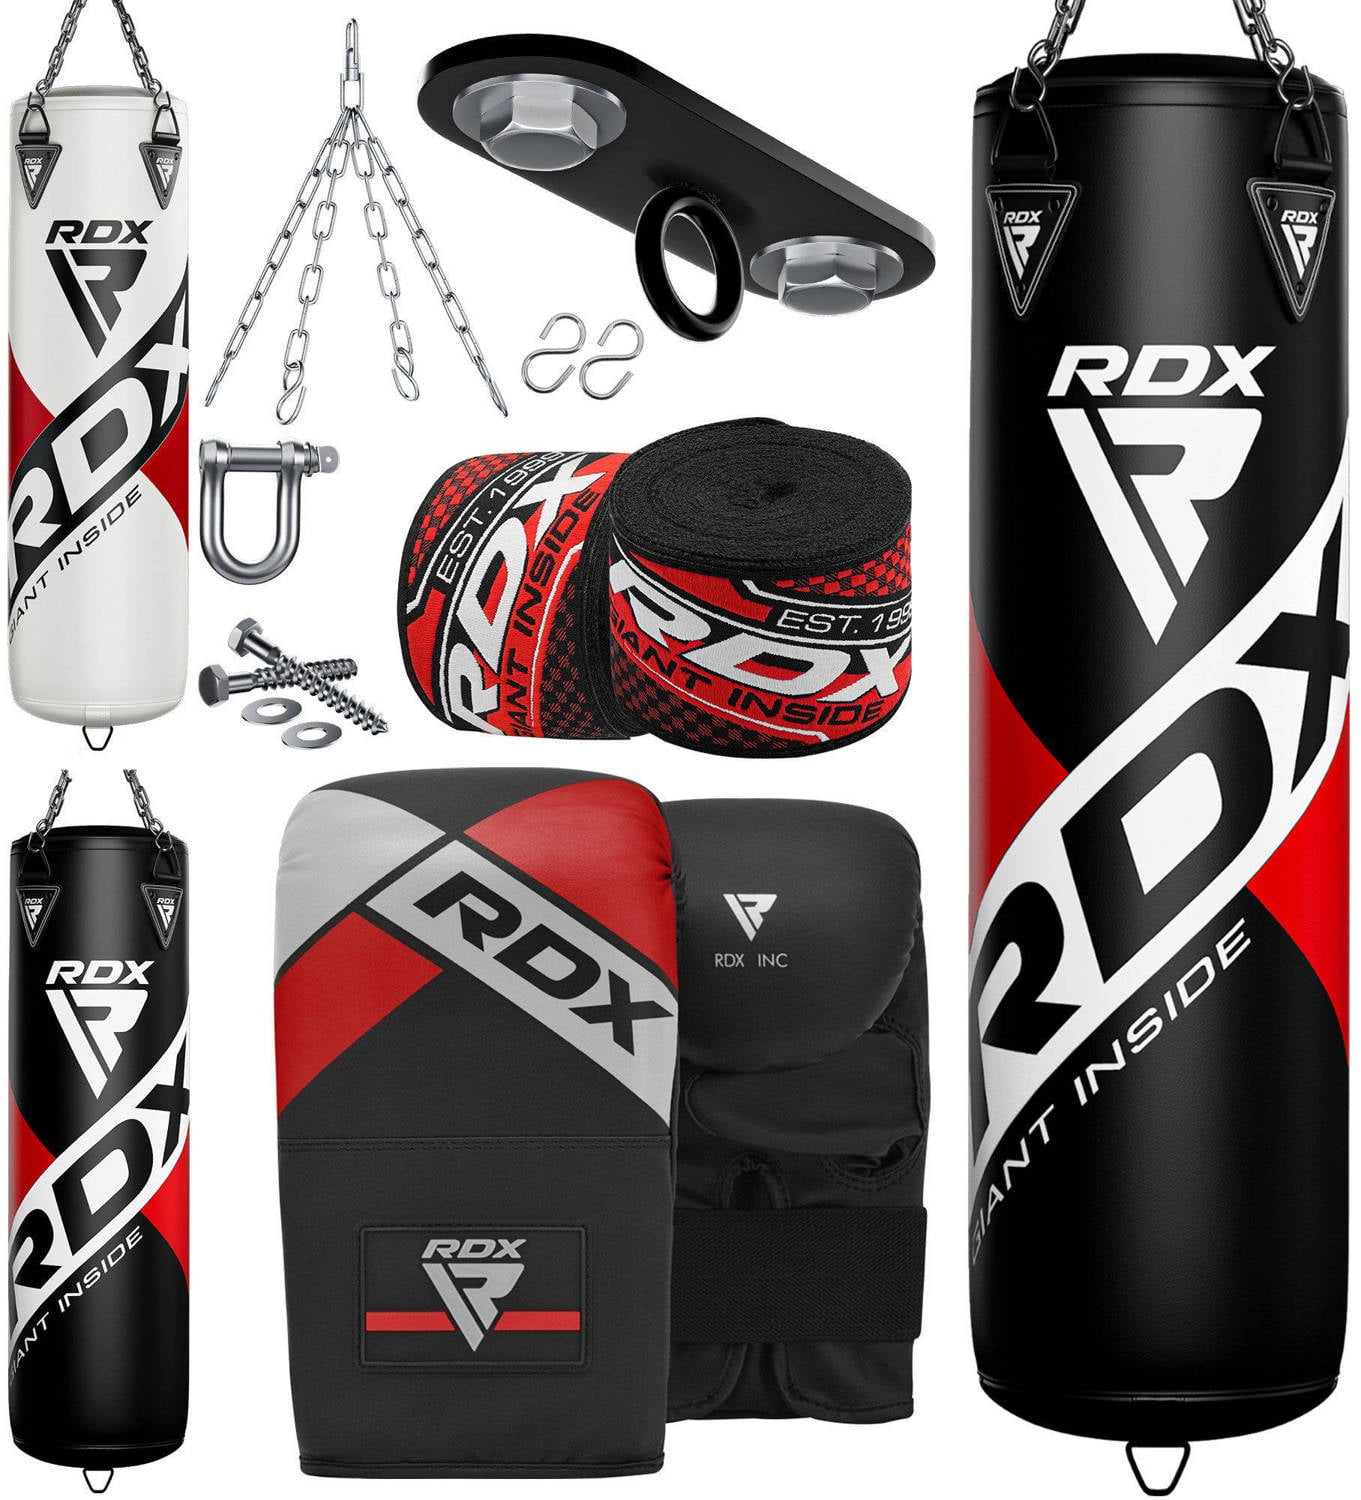 RDX Punching Bag Filled Set Kick Boxing MMA Heavy Muay Thai Training Gloves Punching Mitts Hanging Chain Anchor Ceiling Hook Martial Arts 4FT 5FT 